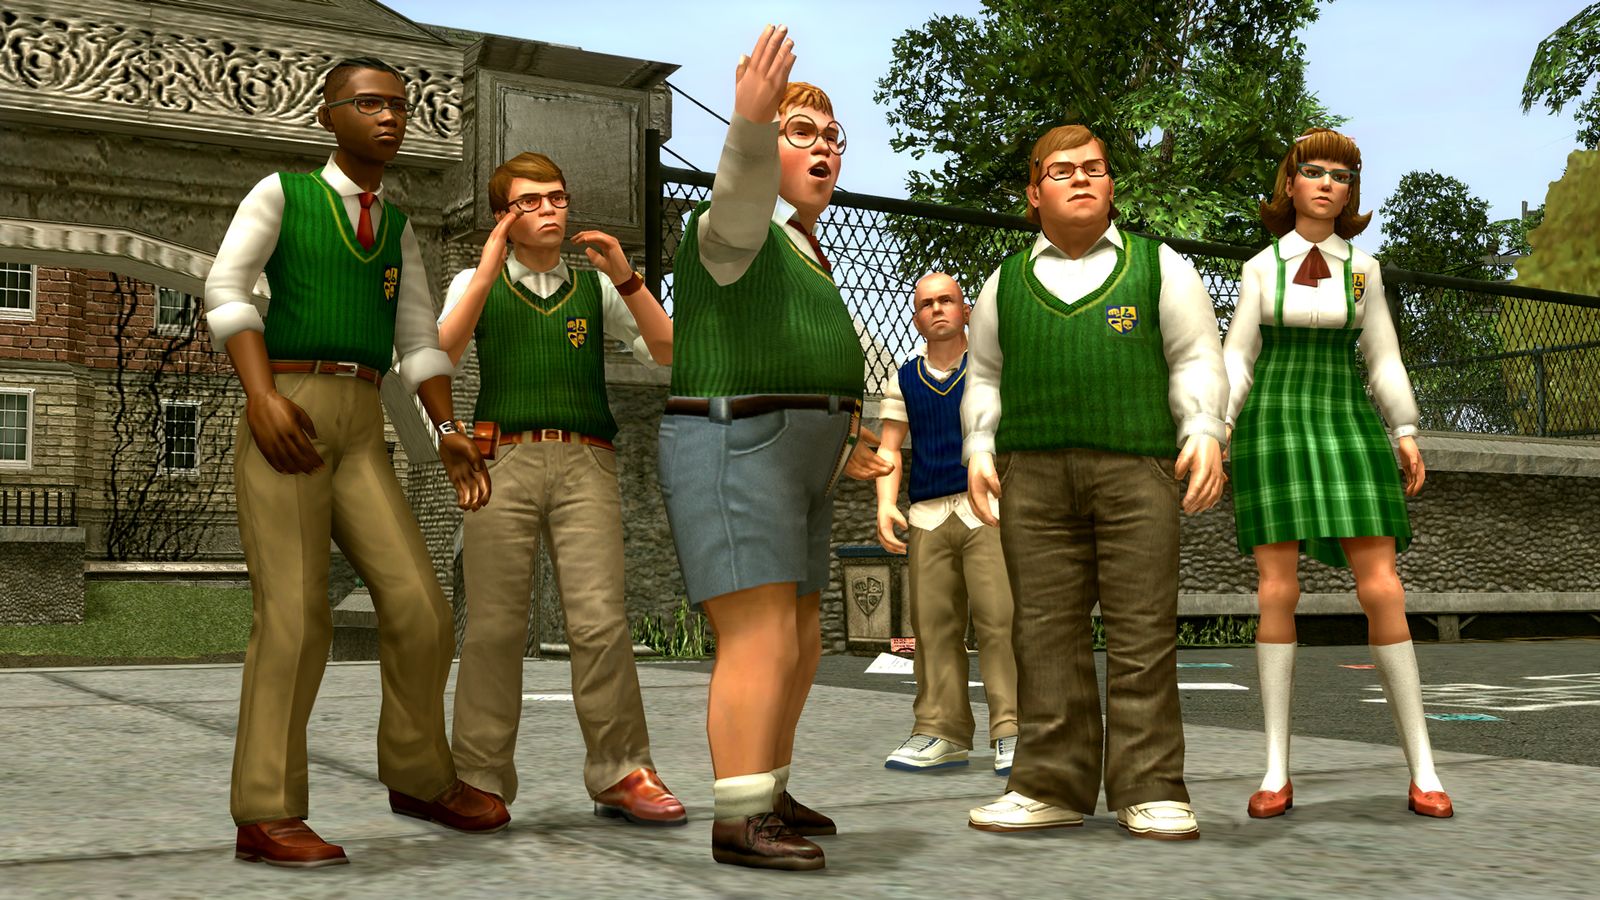 Big Bully - Bully 2 has been a longtime ask from Rockstar fans